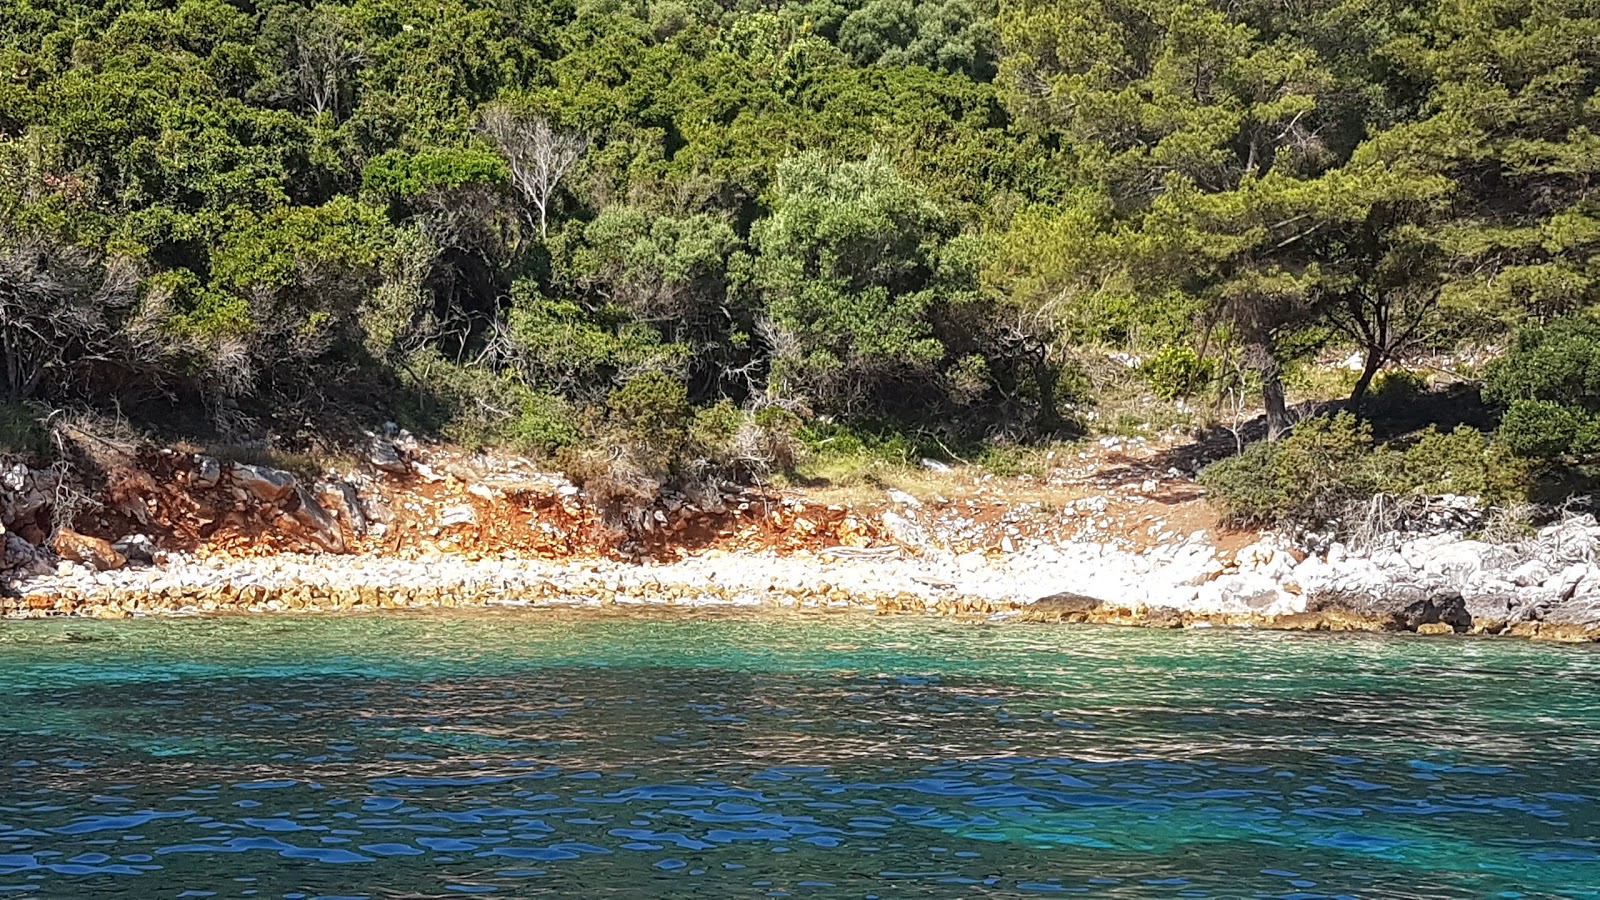 Photo of Korita bay with turquoise pure water surface